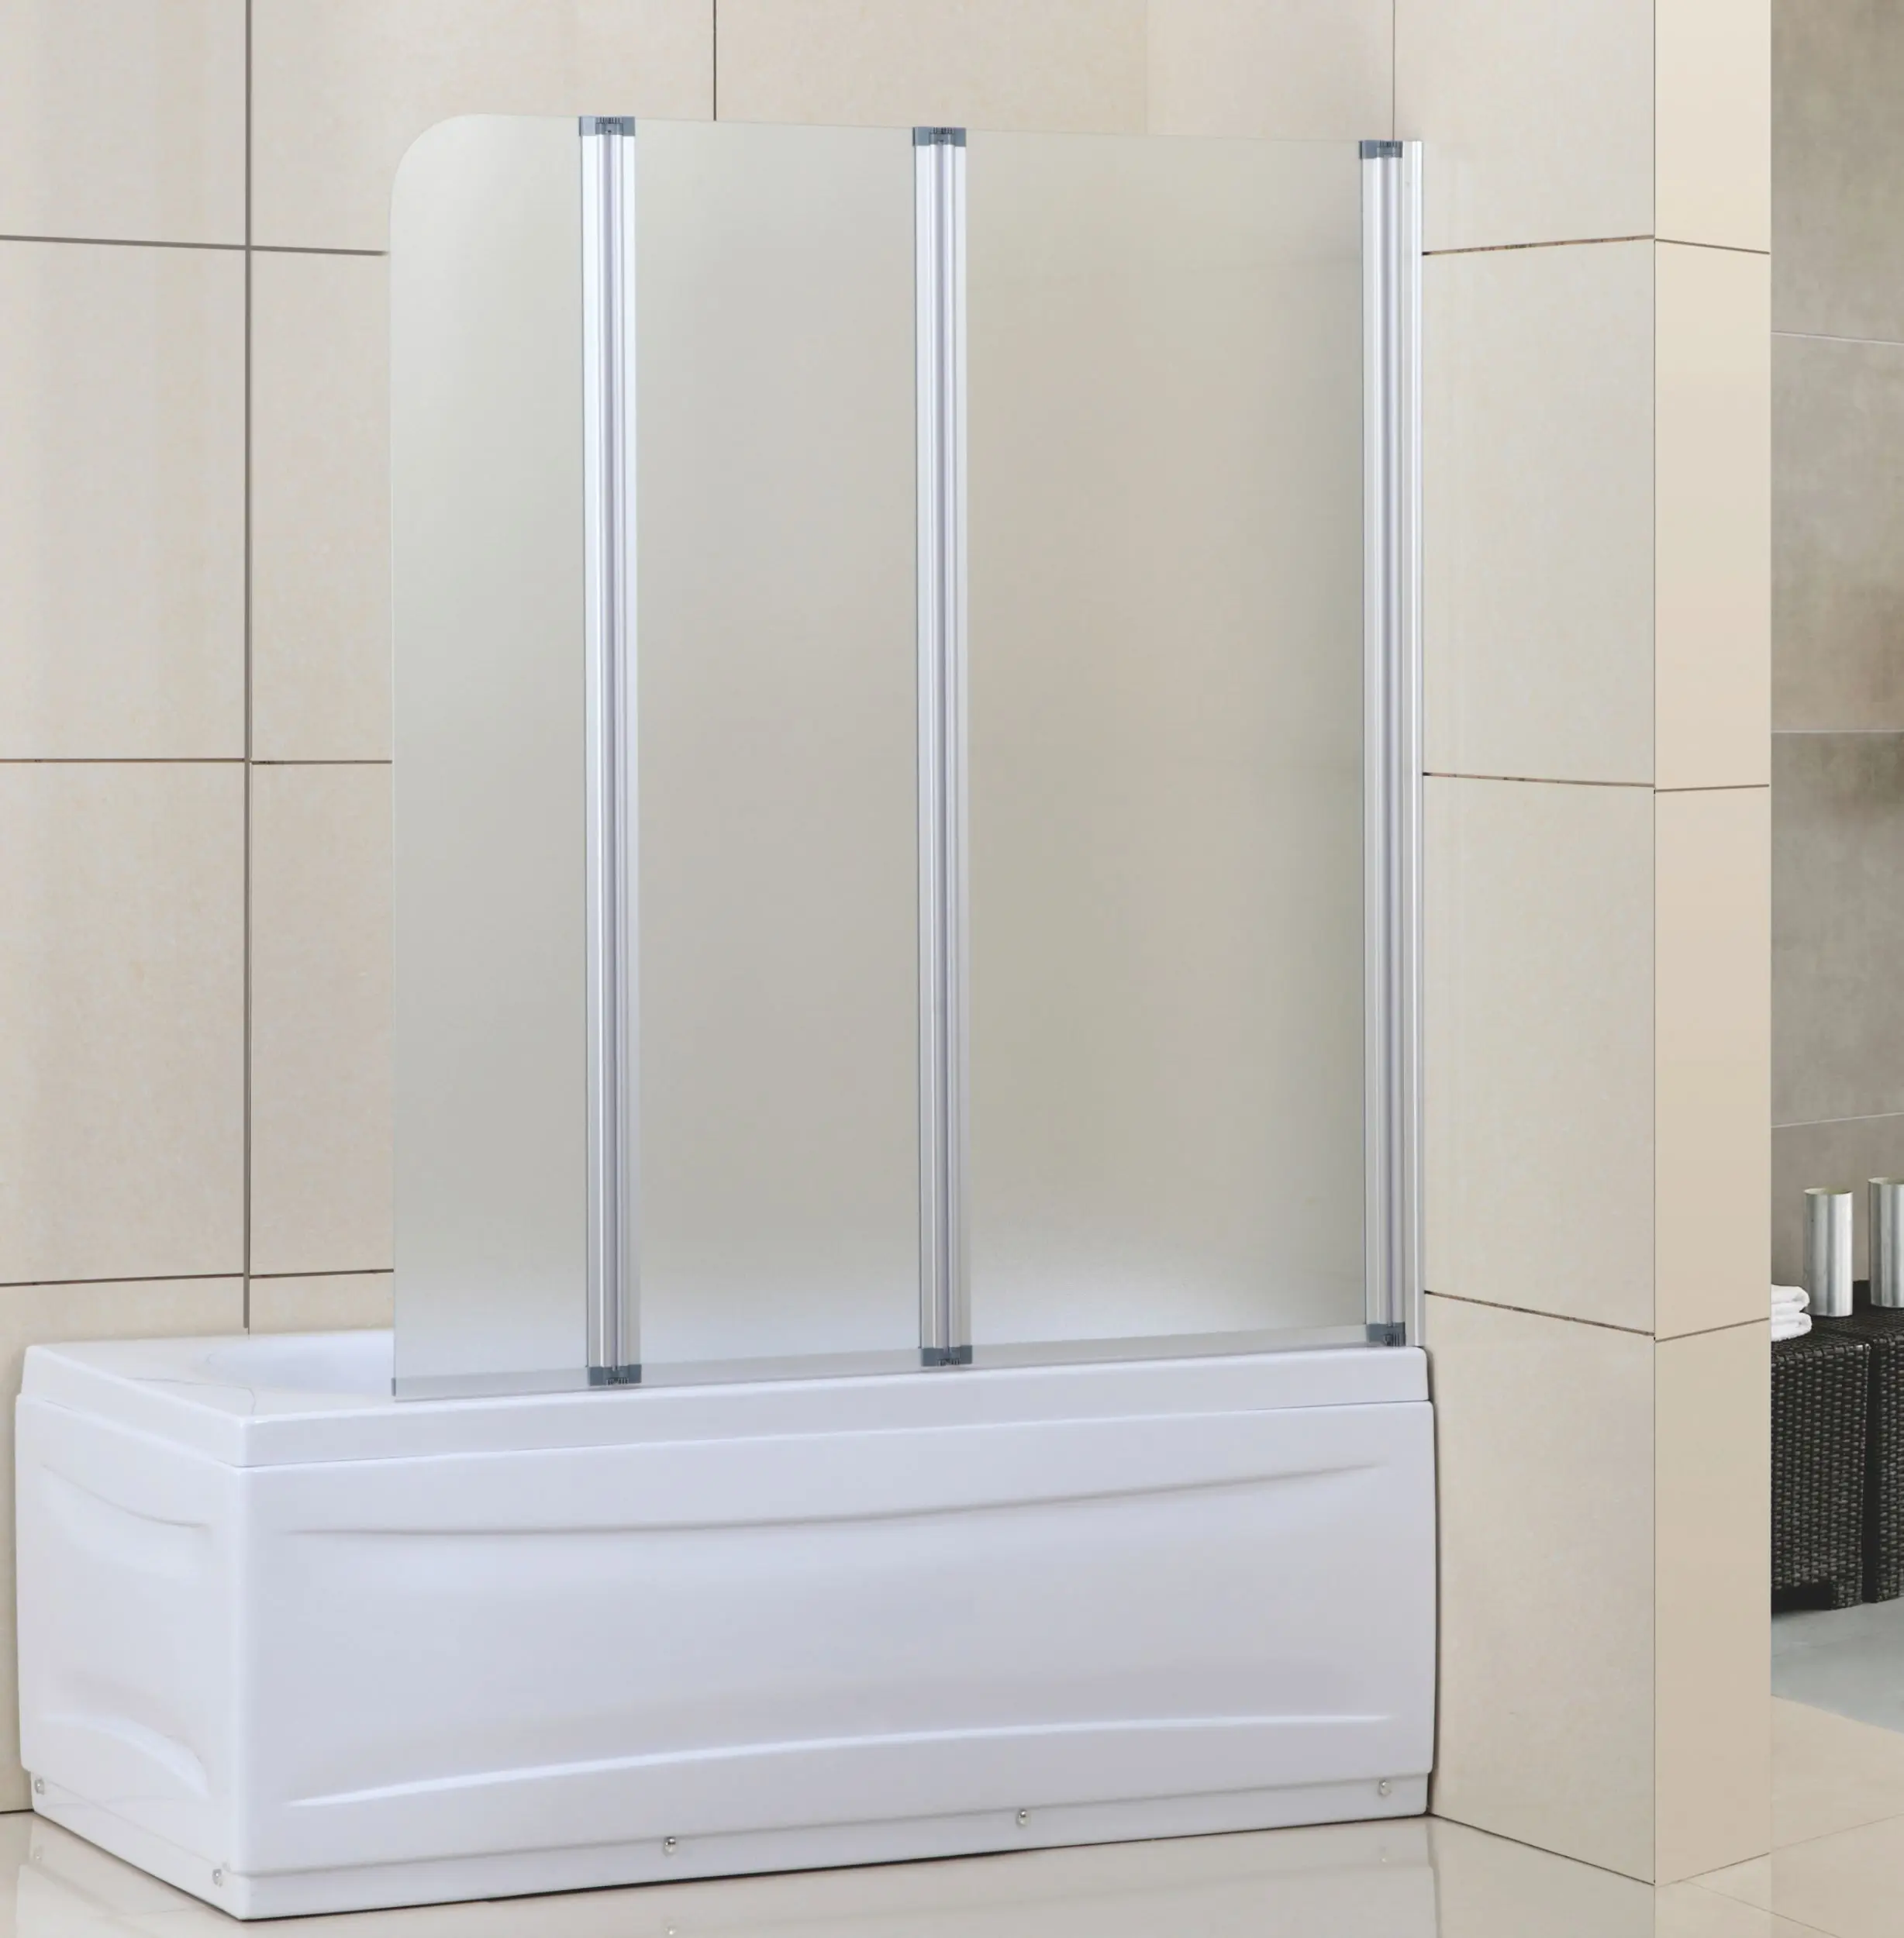 
3 folded free style 4mm safety Glass Shower Bathtub Screen free standing HOT online selling model 